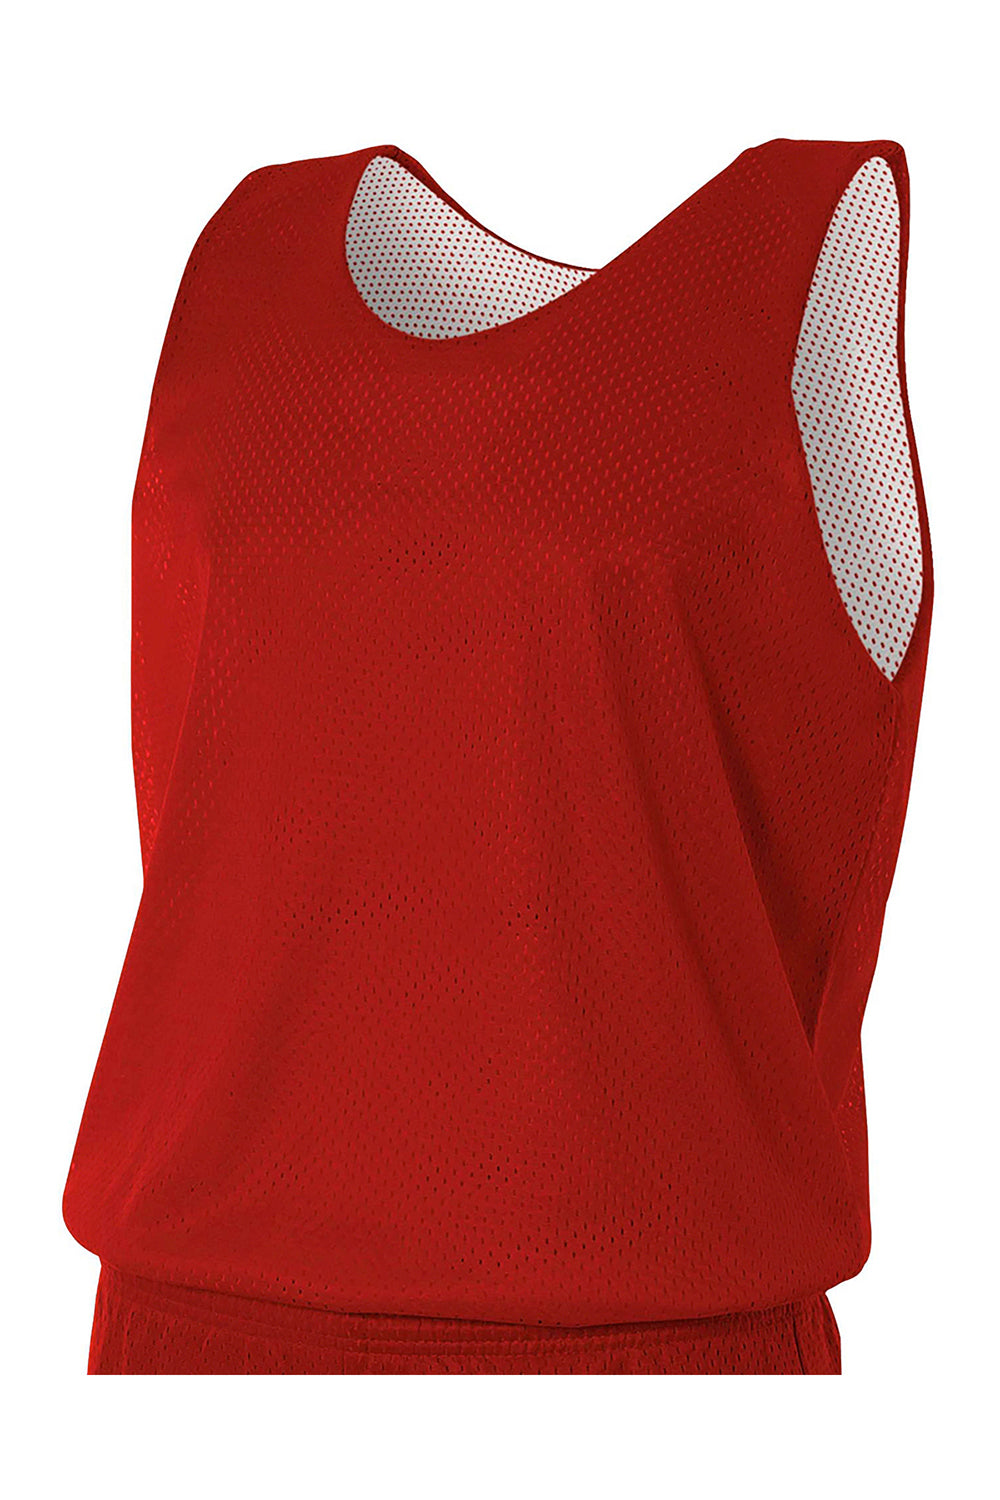 A4 NF1270 Mens Reversible Mesh Moisture Wicking Tank Top Scarlet Red Flat Front